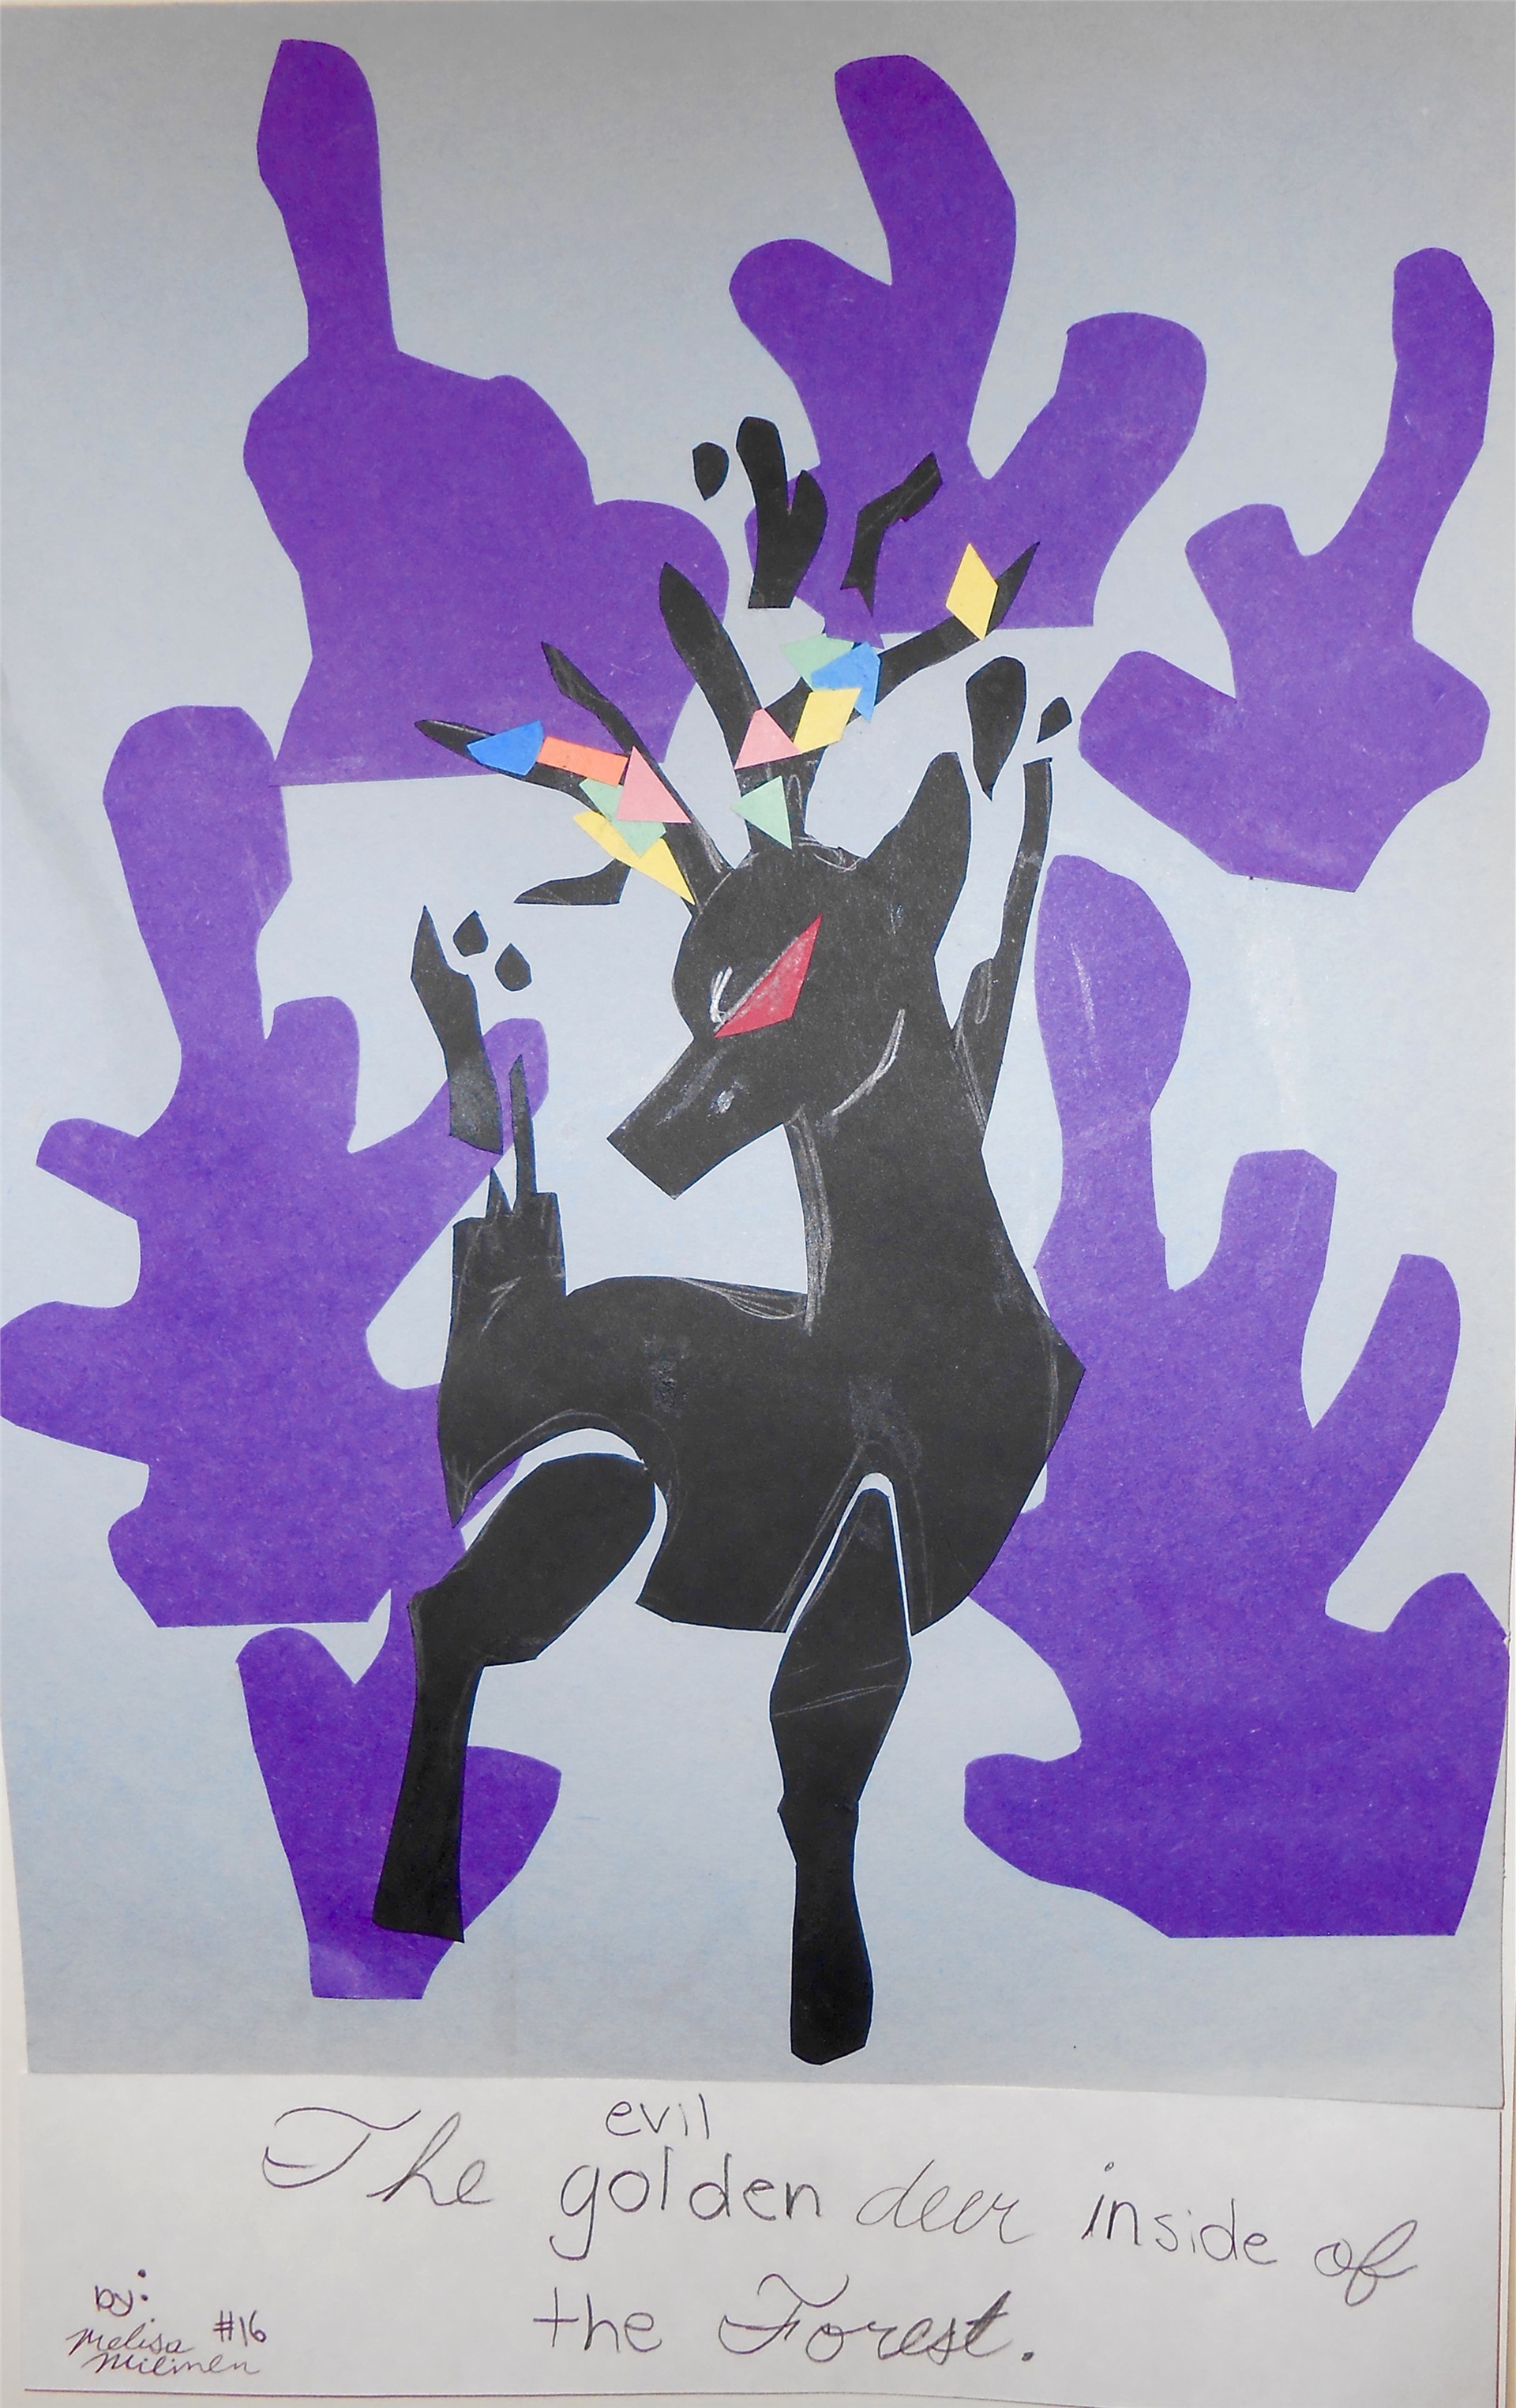 Illustrating Ramayana in the style of Matisse cut-outs.